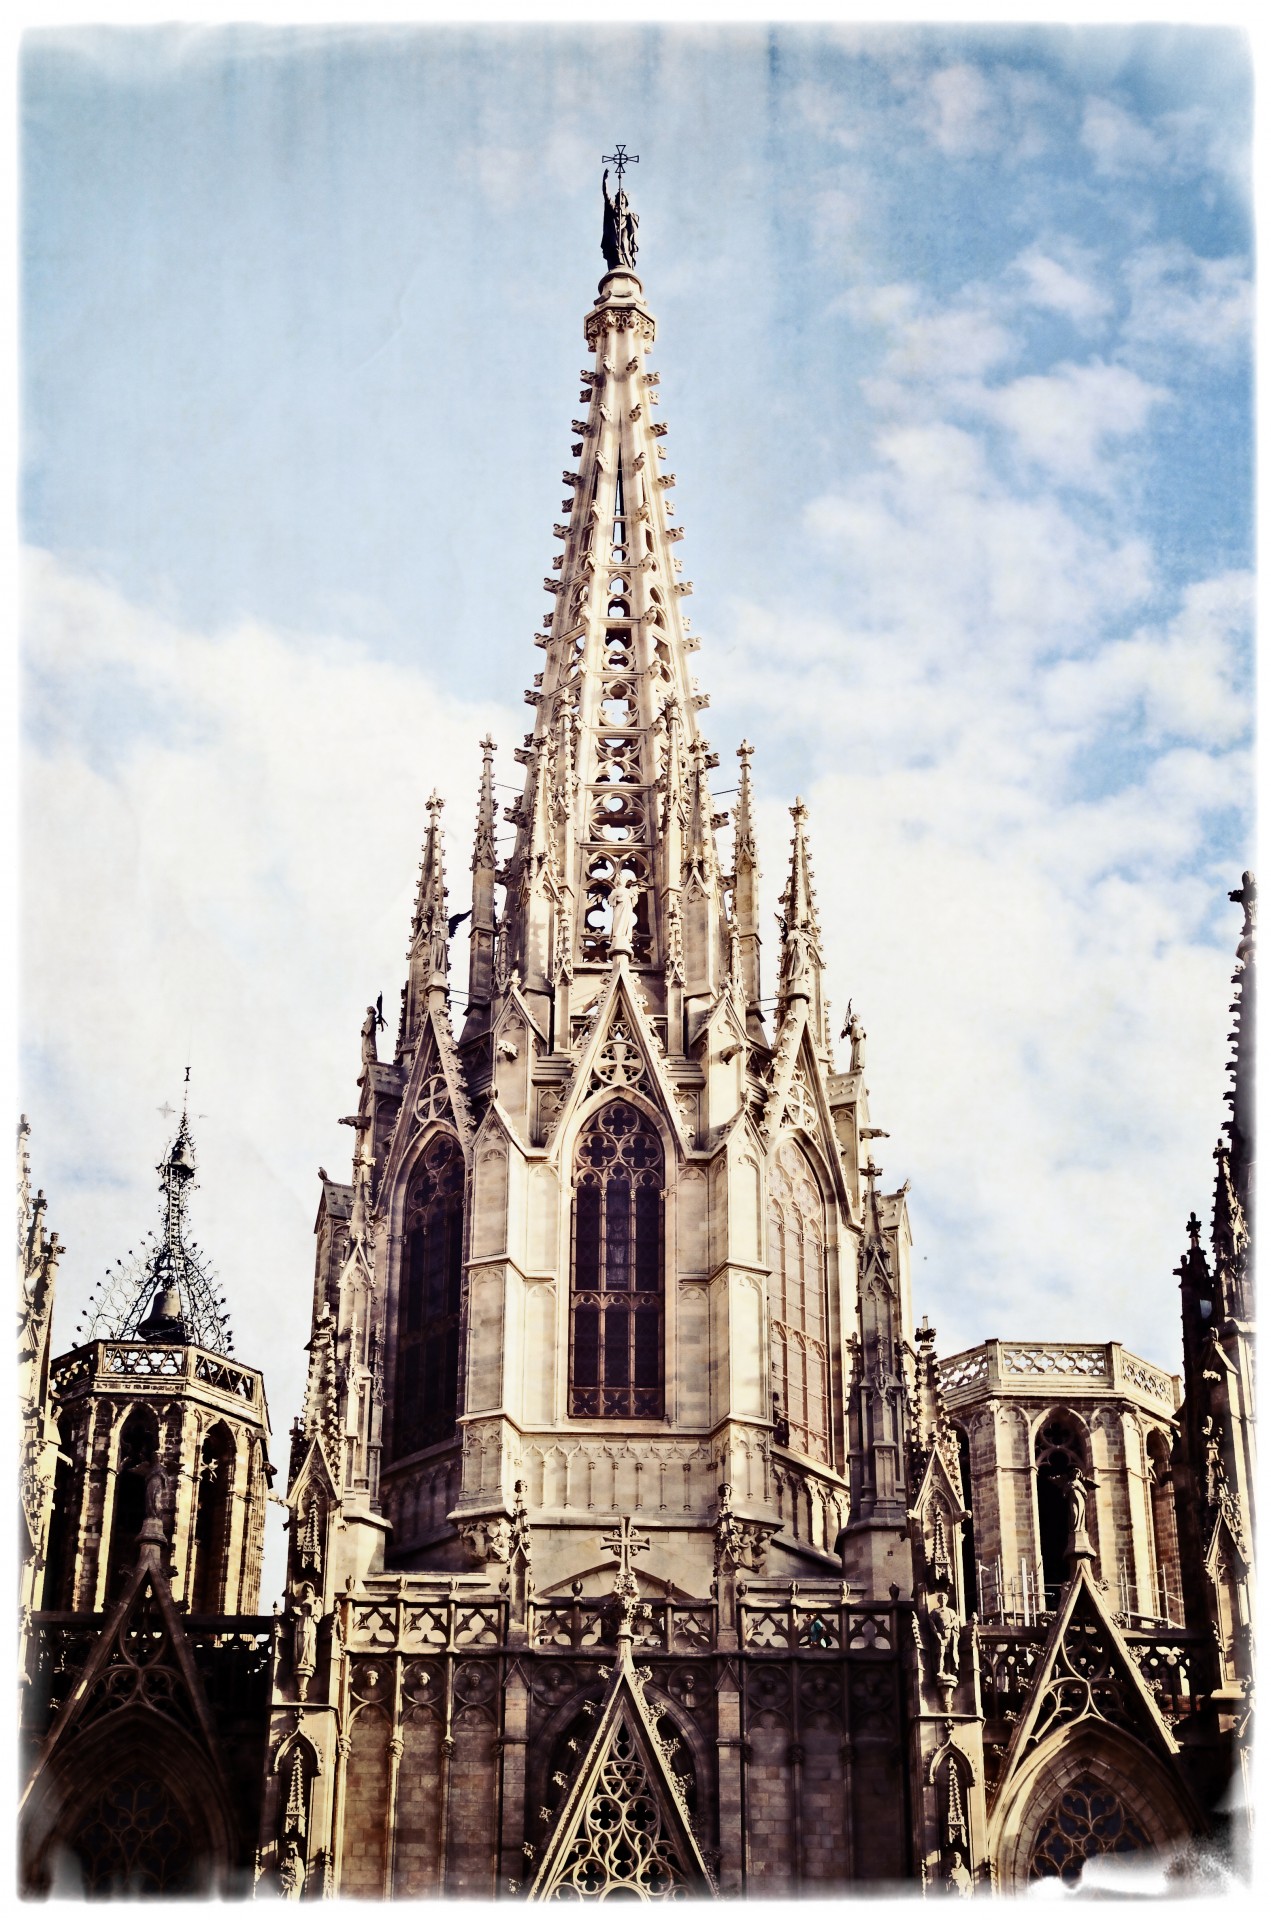 Cathedral of Barcelona, Spain. Vintage look added